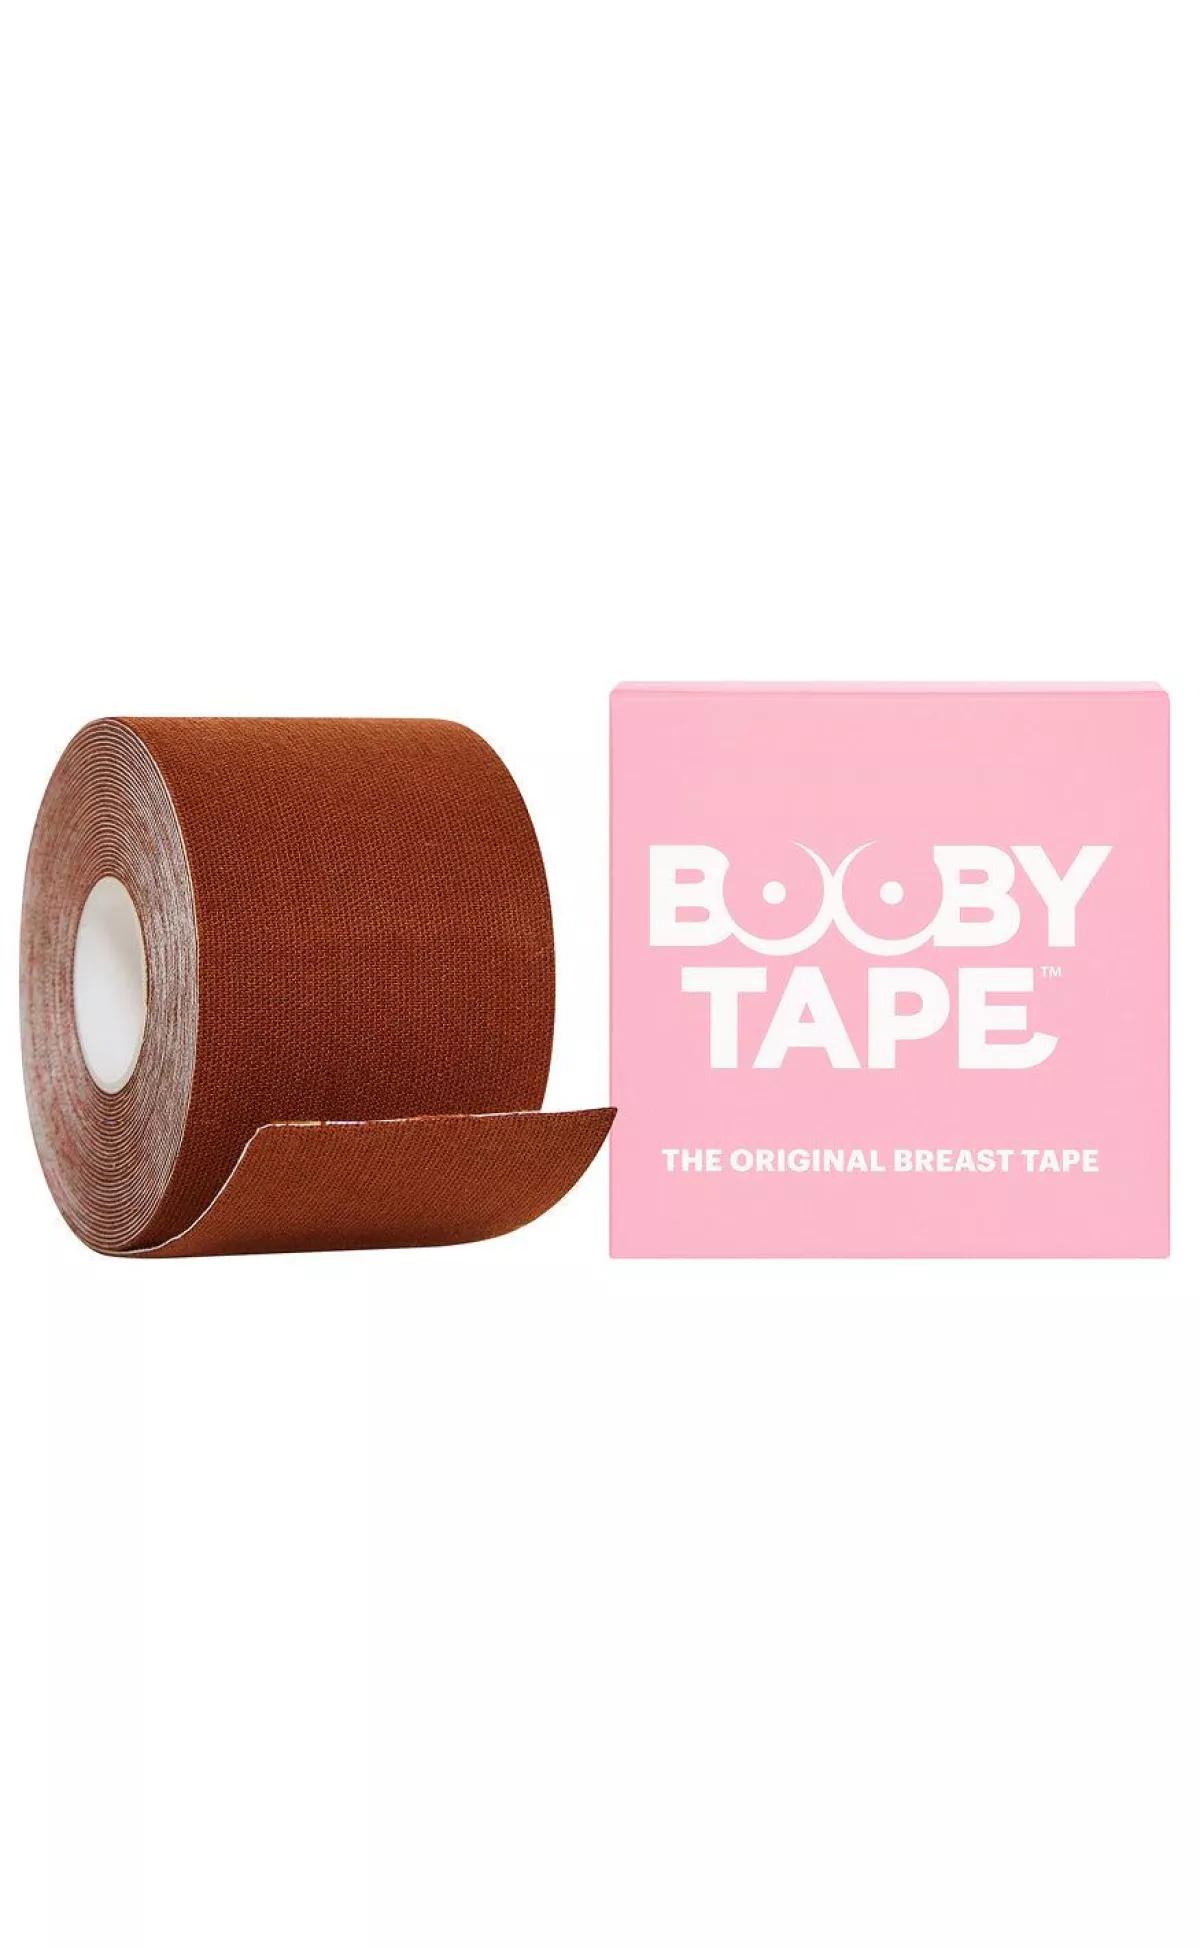 #3 - Booby Tape - Brysttape - Brown